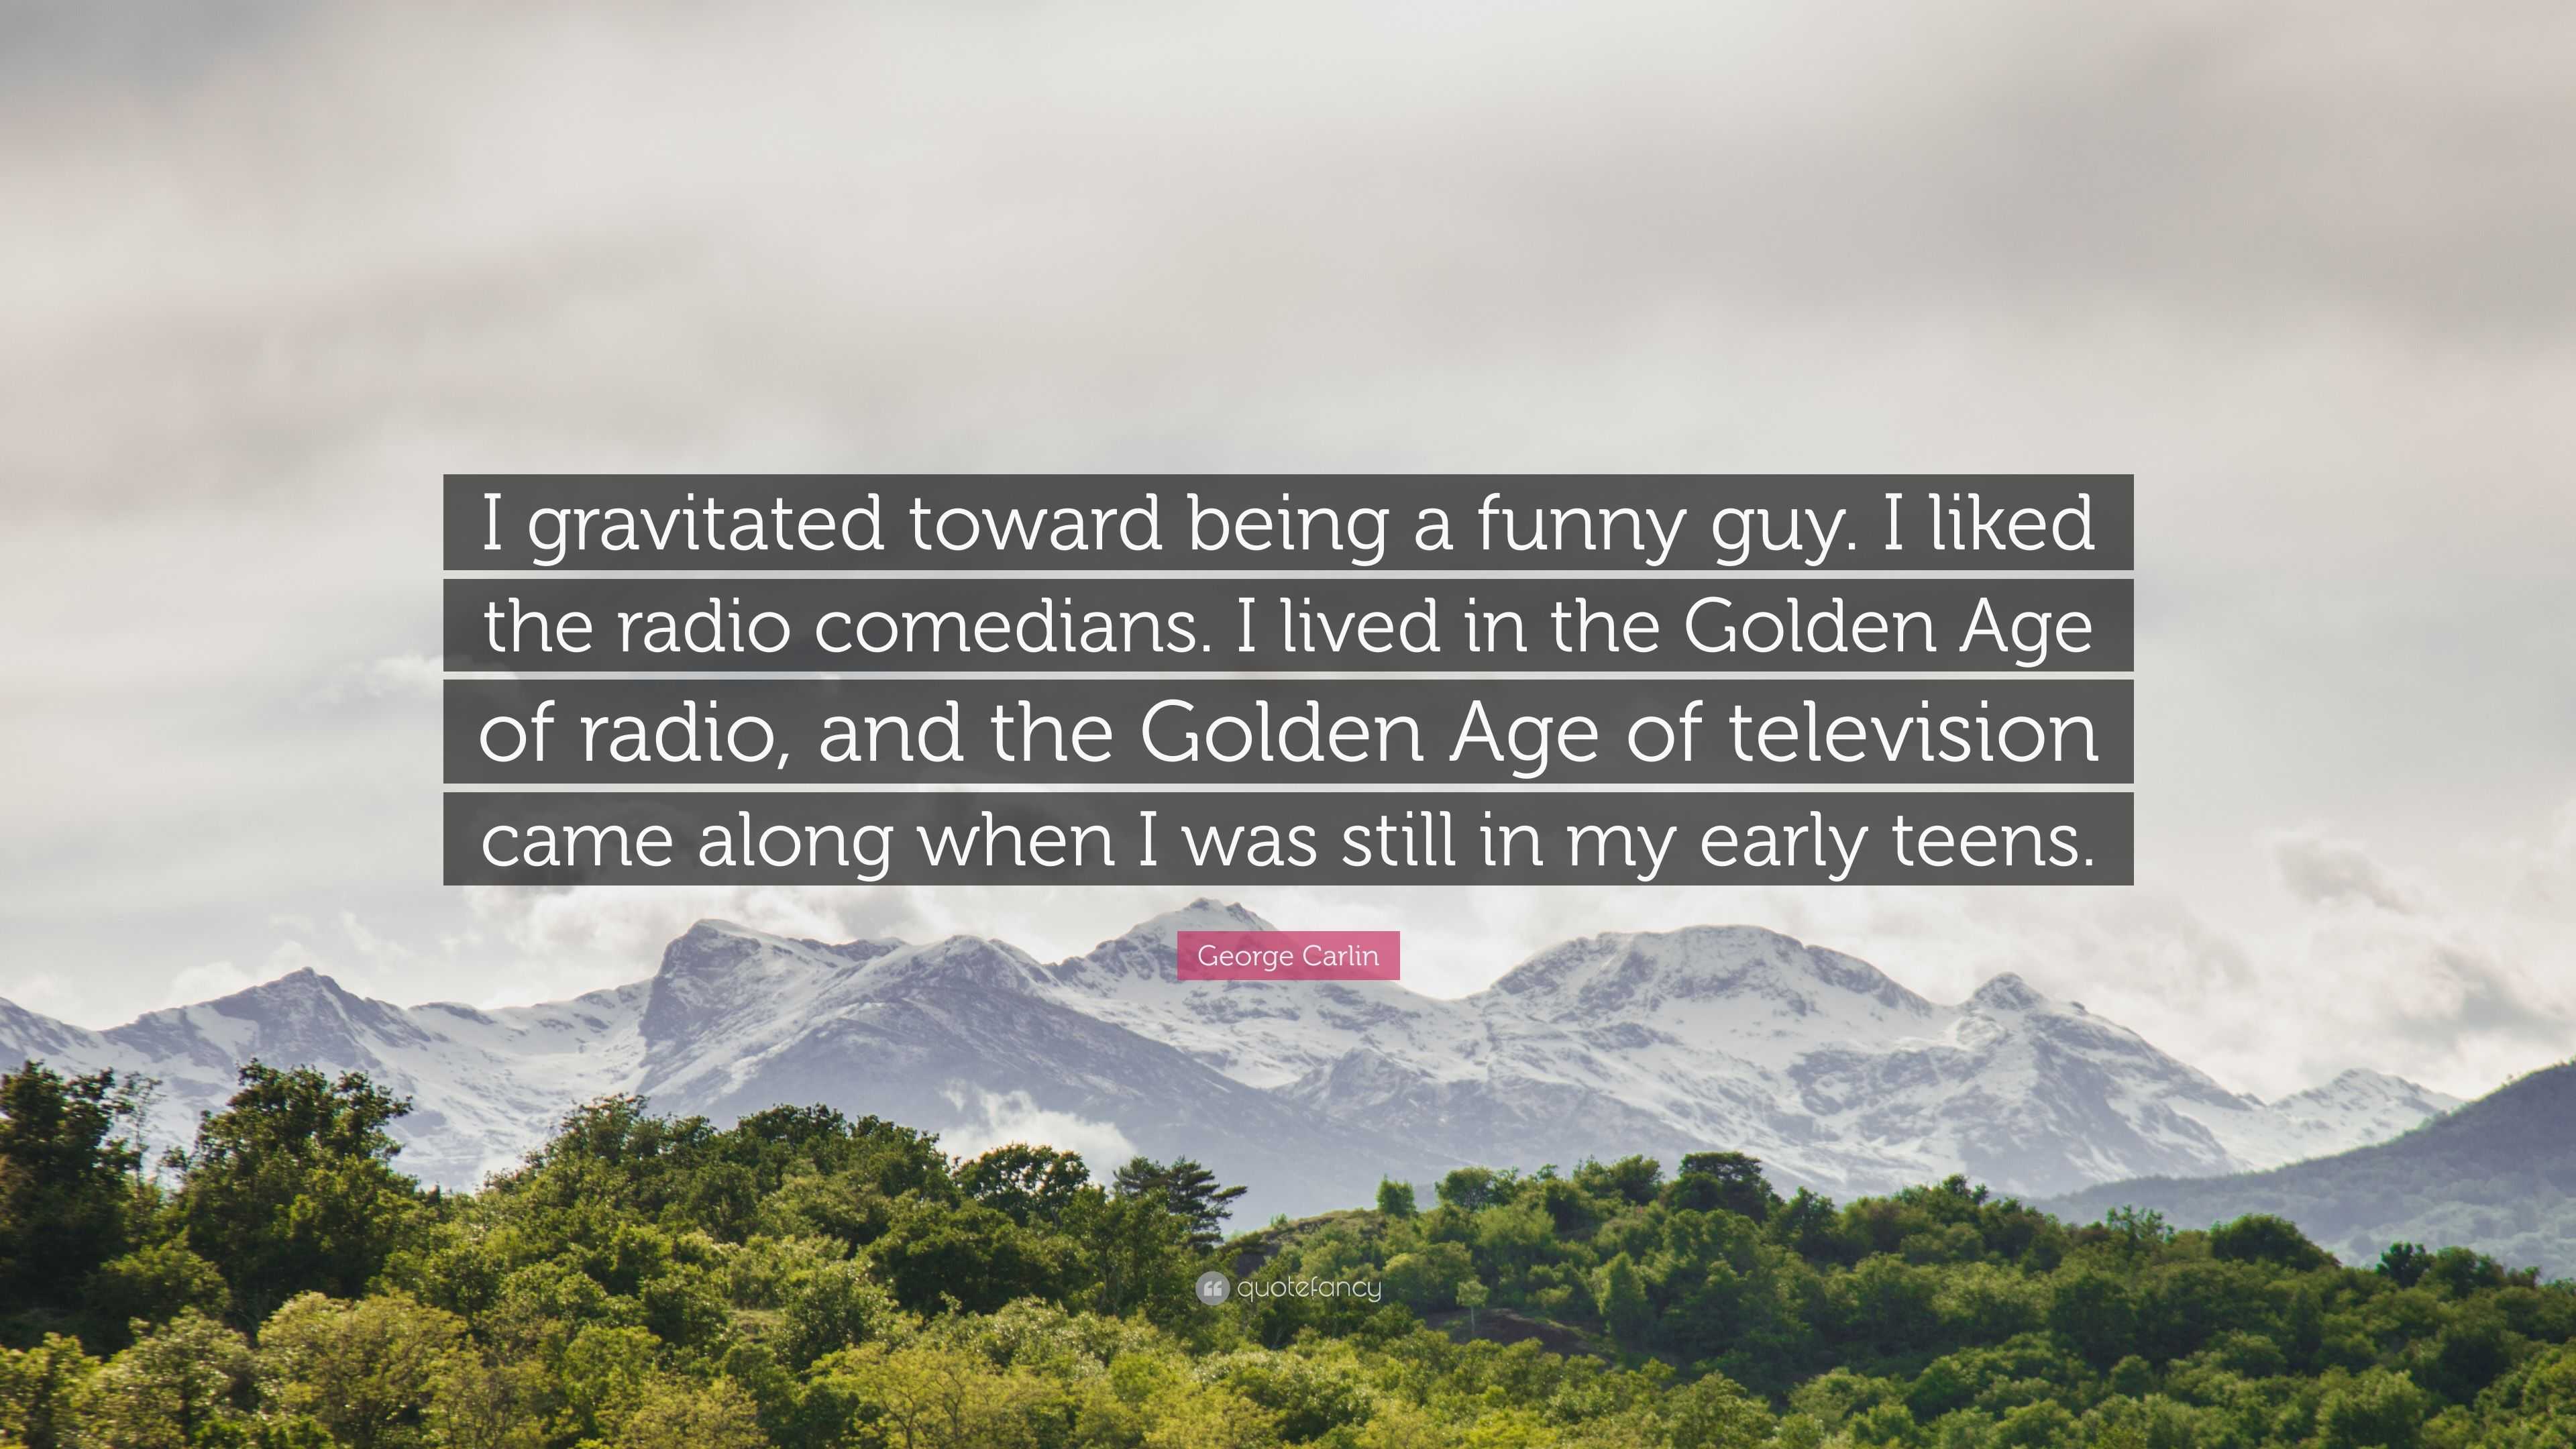 George Carlin Quote: “I gravitated toward being a funny guy. I liked the  radio comedians. I lived in the Golden Age of radio, and the Golden A...”